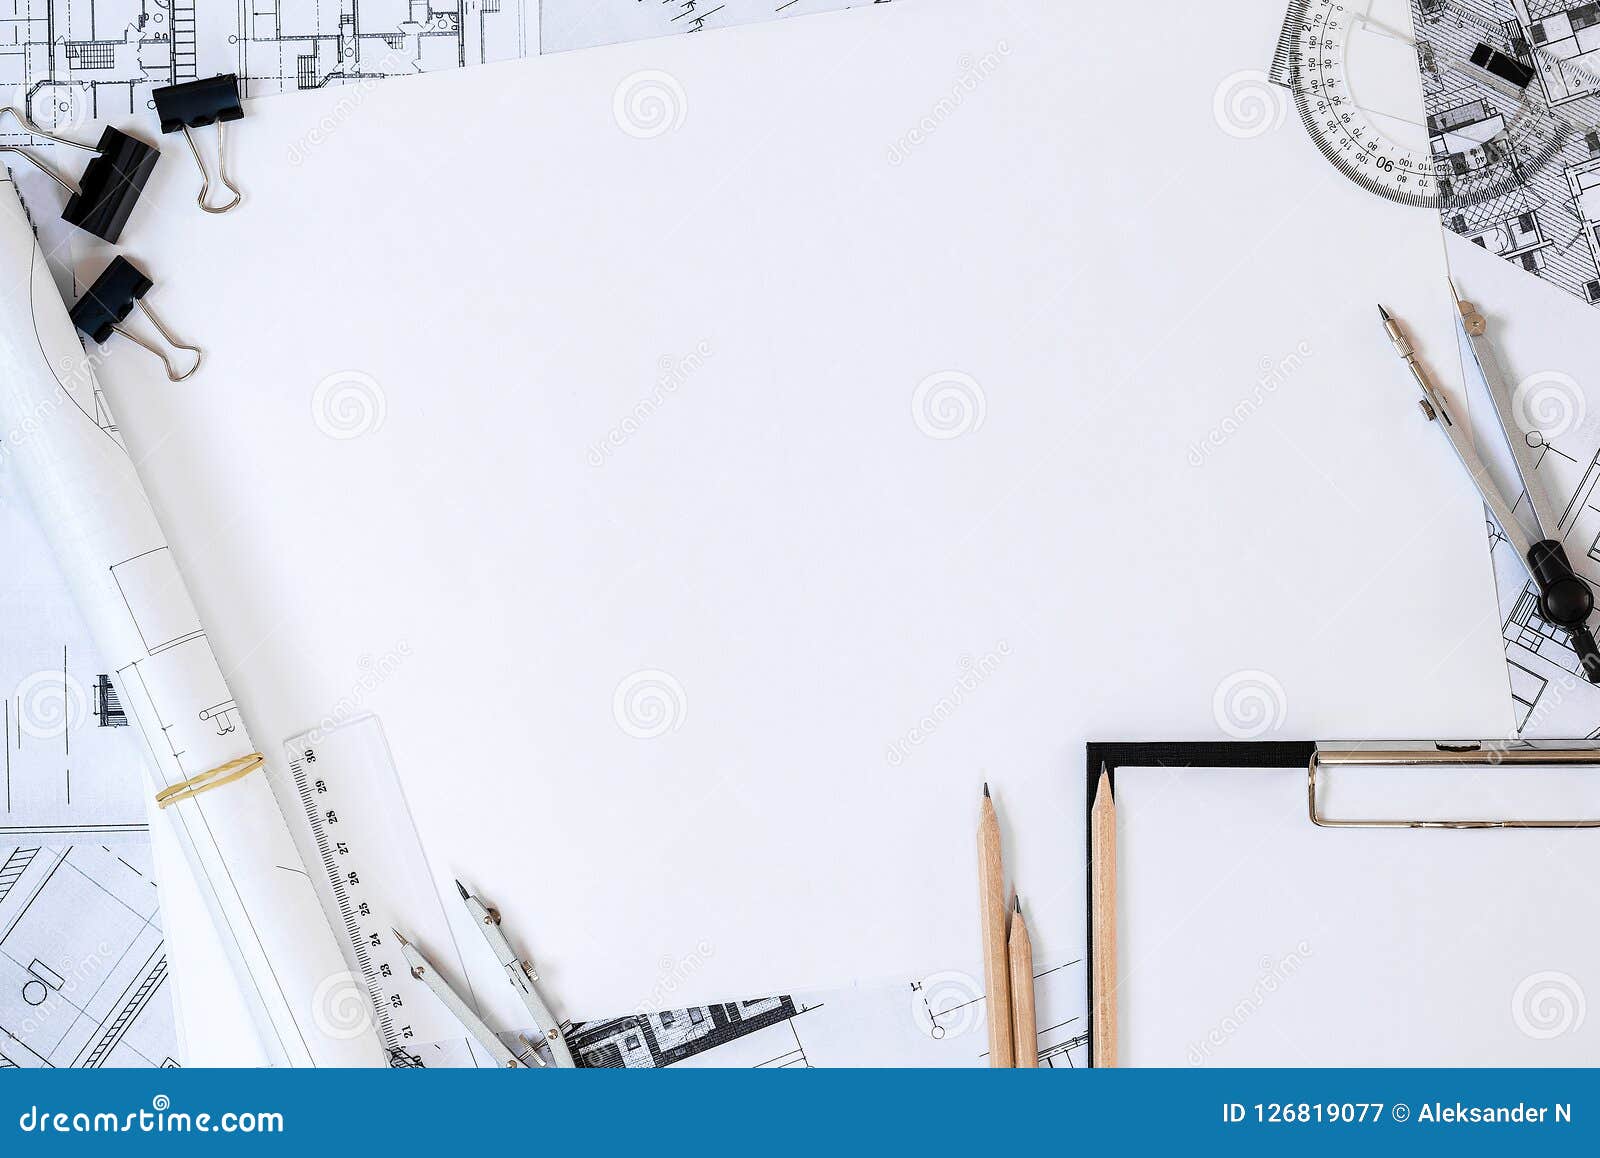 architectural plans, pencil and ruler on the table. place for your text